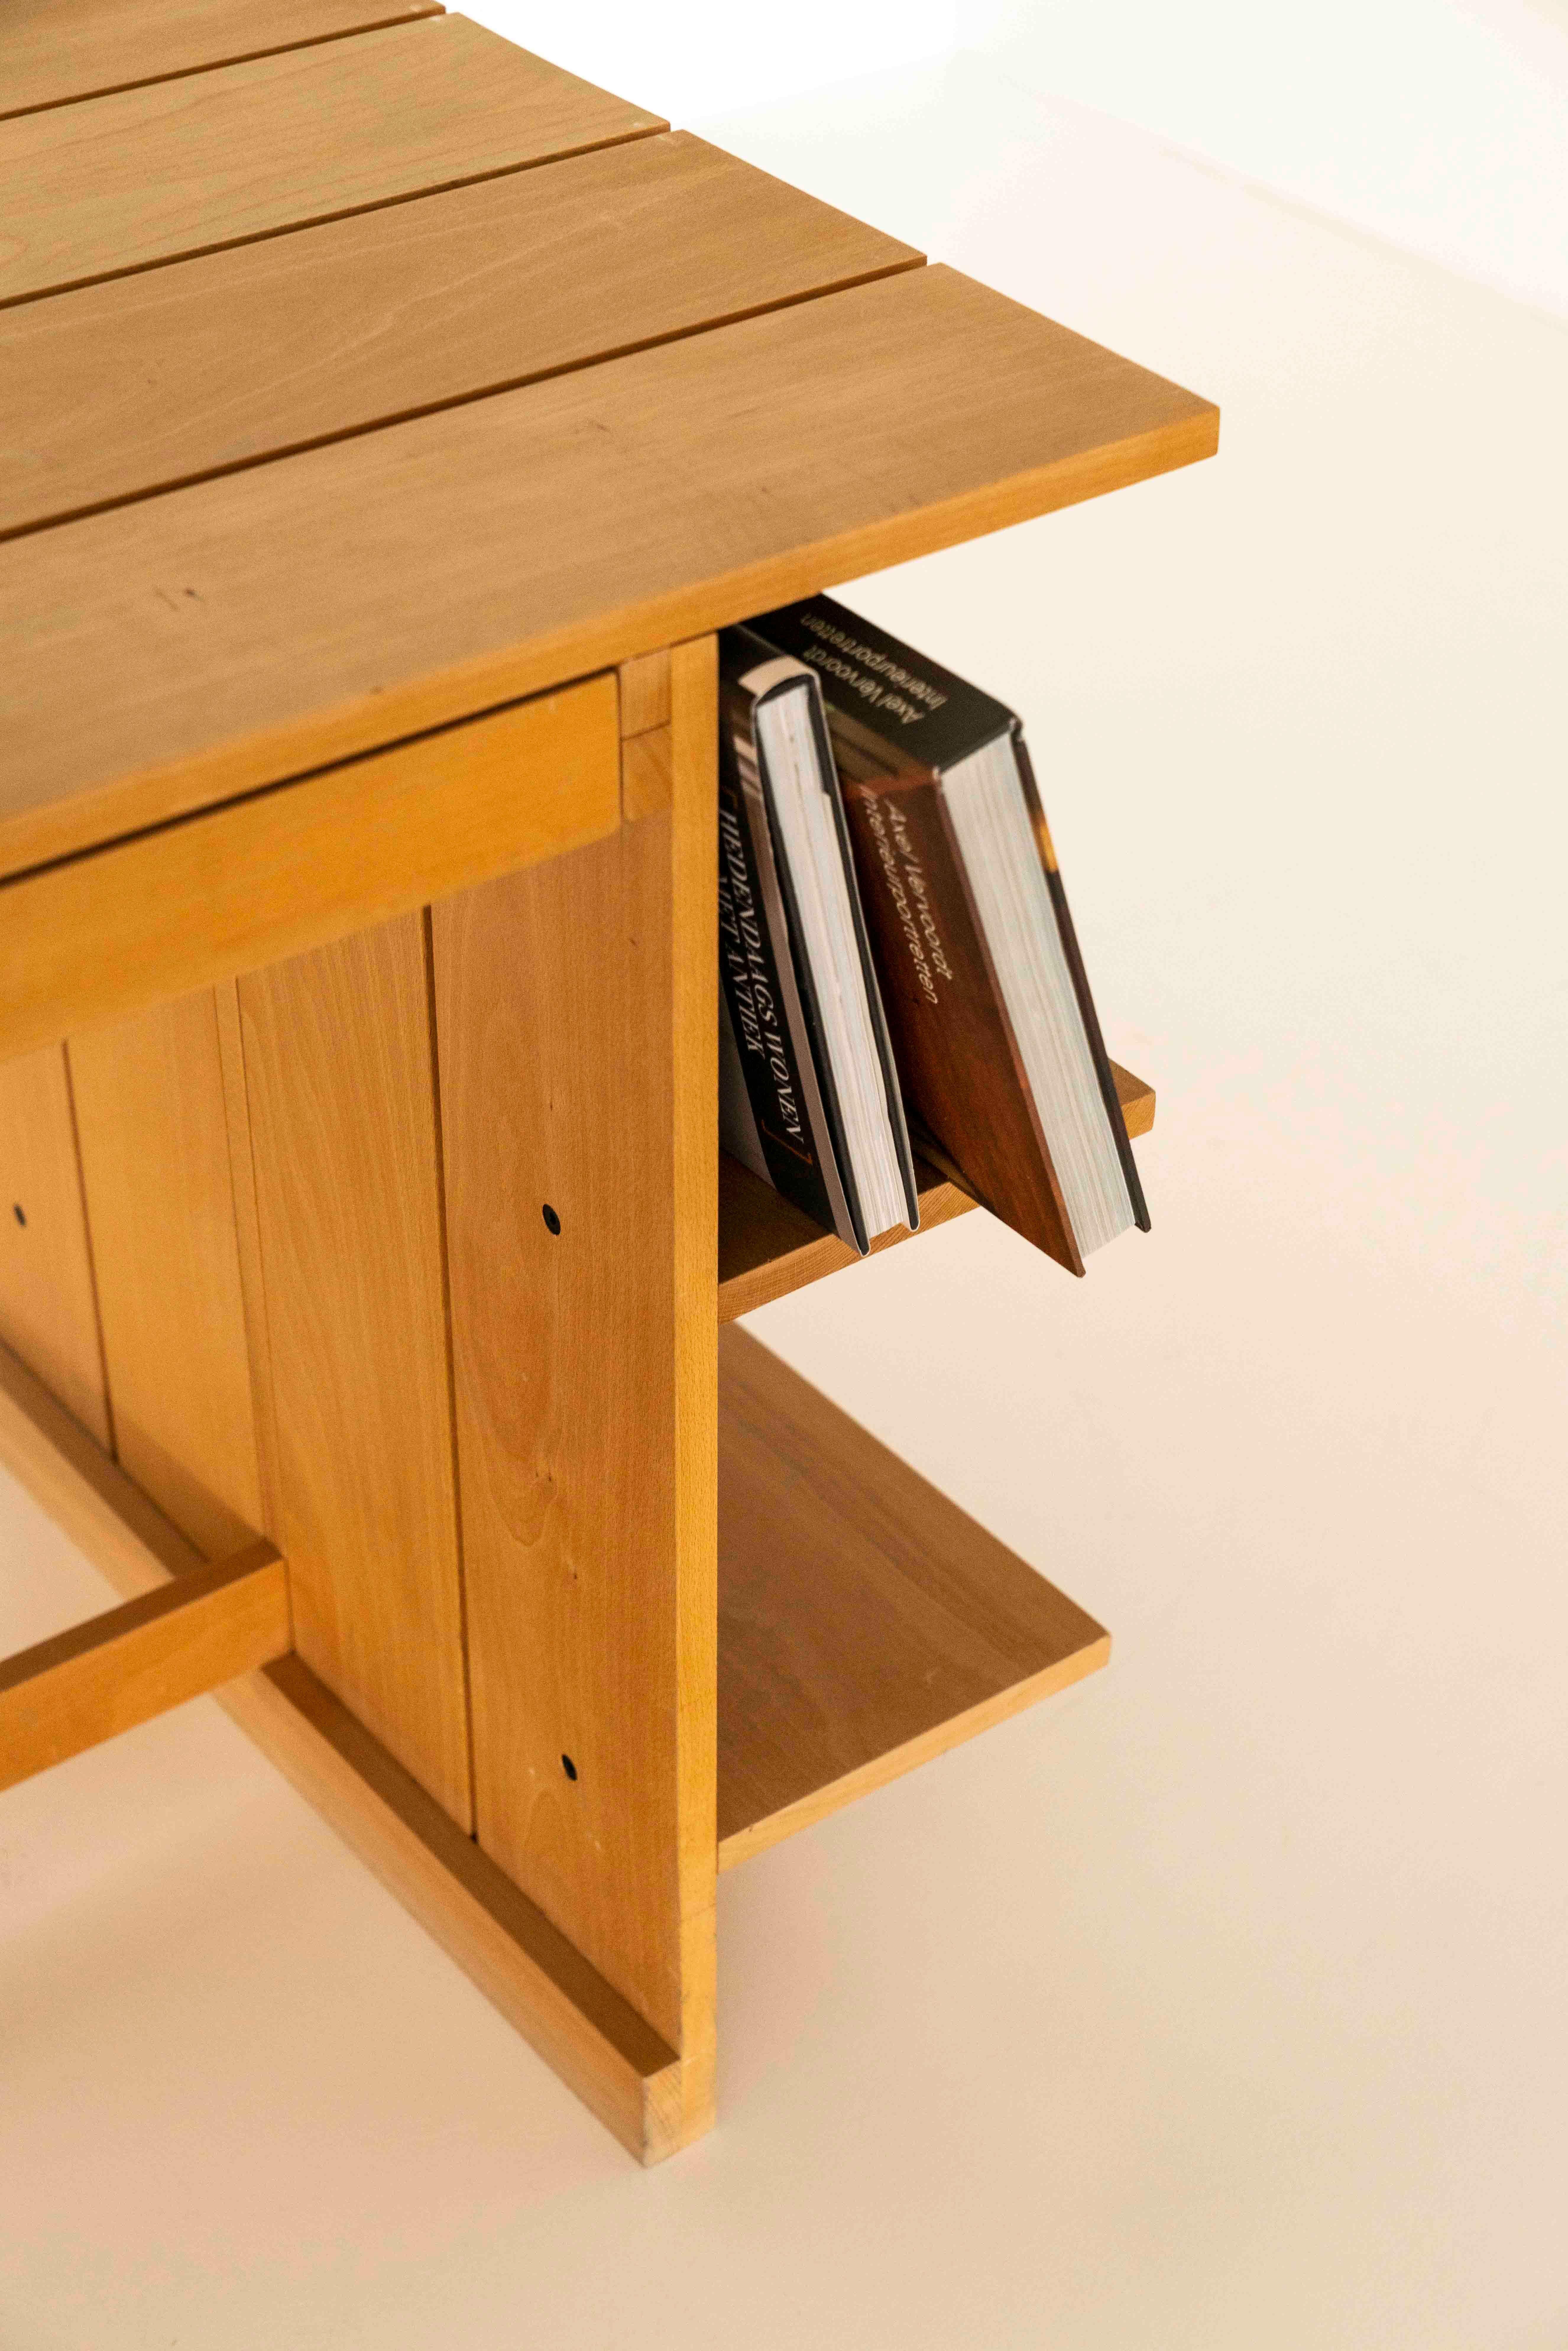 20th Century Crate Desk for Cassina by Gerrit Rietveld, Designed in 1930s, the Netherlands